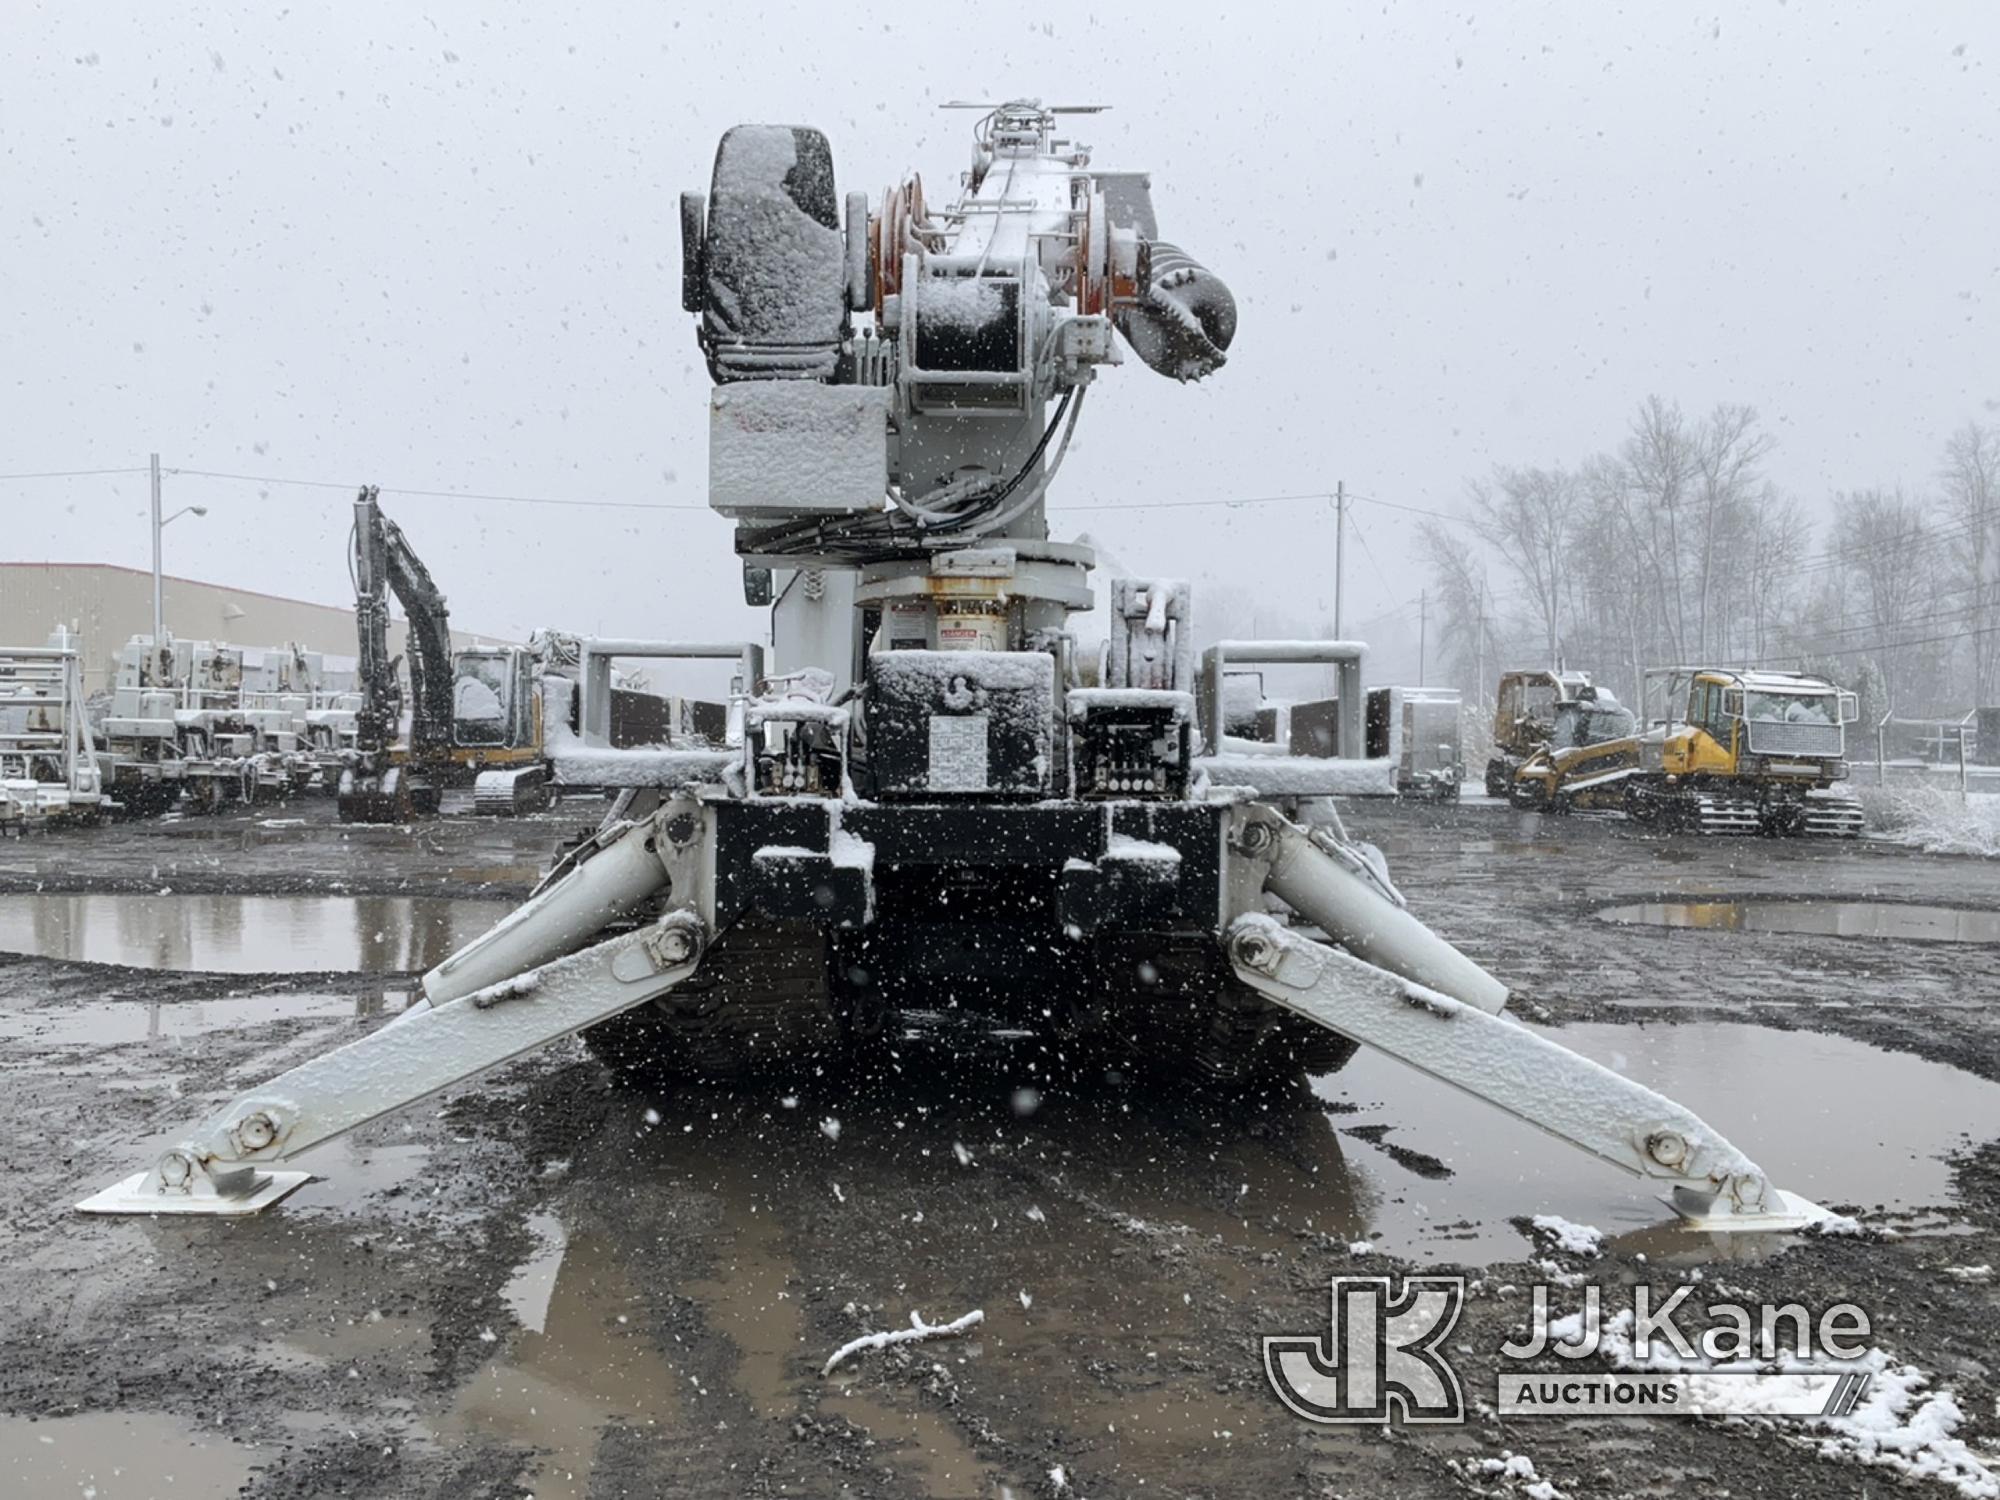 (Rome, NY) Terex/Telelect General, Digger Derrick rear mounted on 2017 Prinoth Panther T16 Crawler A